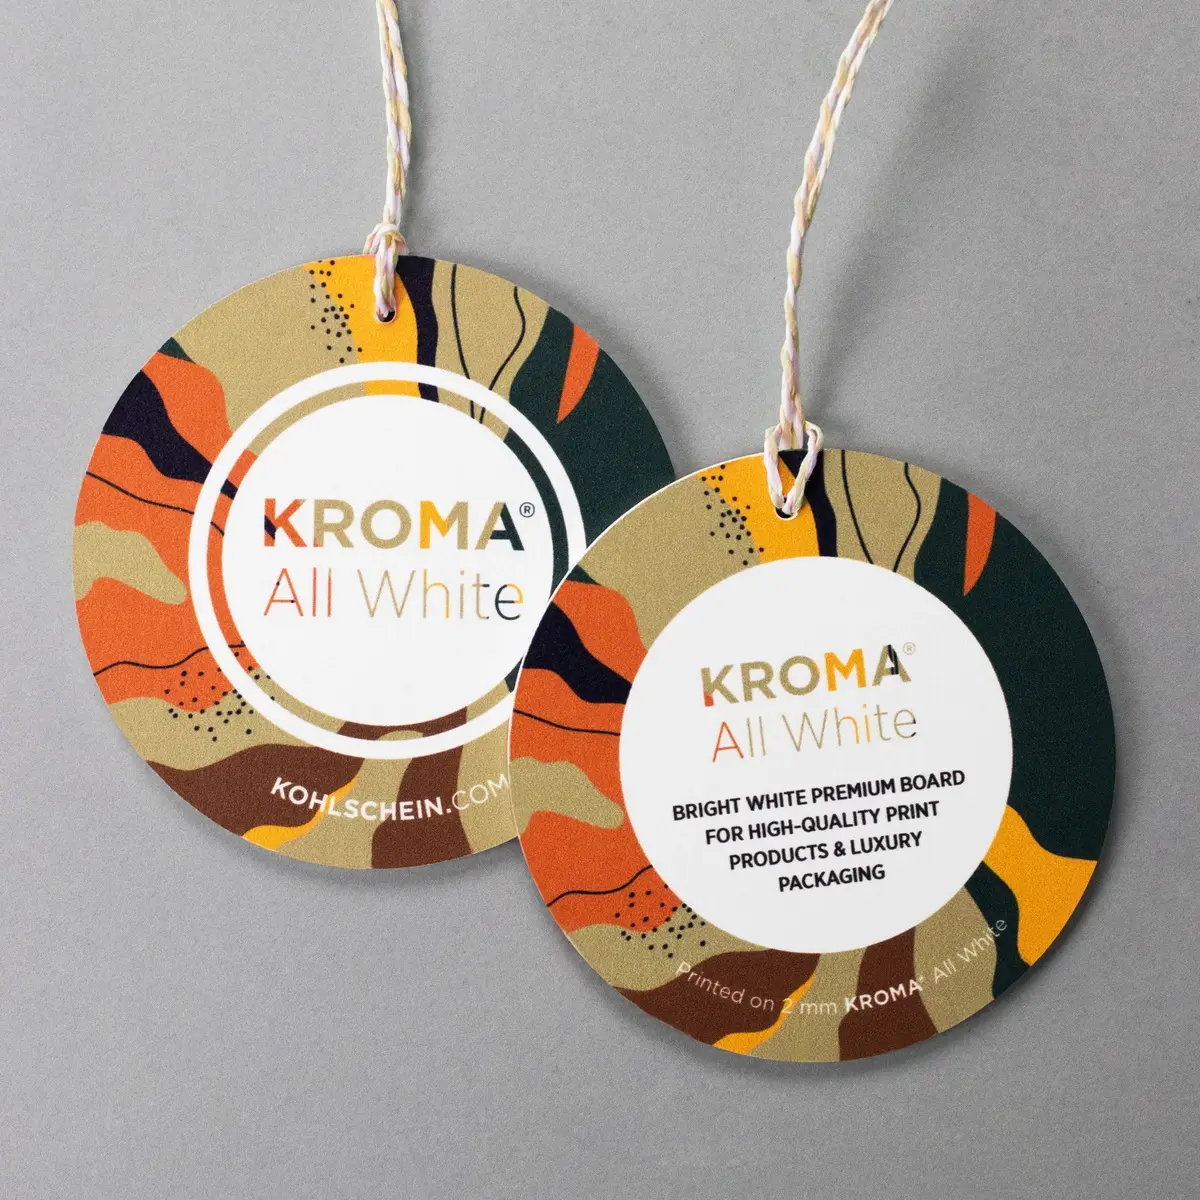 Round hang tags made of KROMA All White